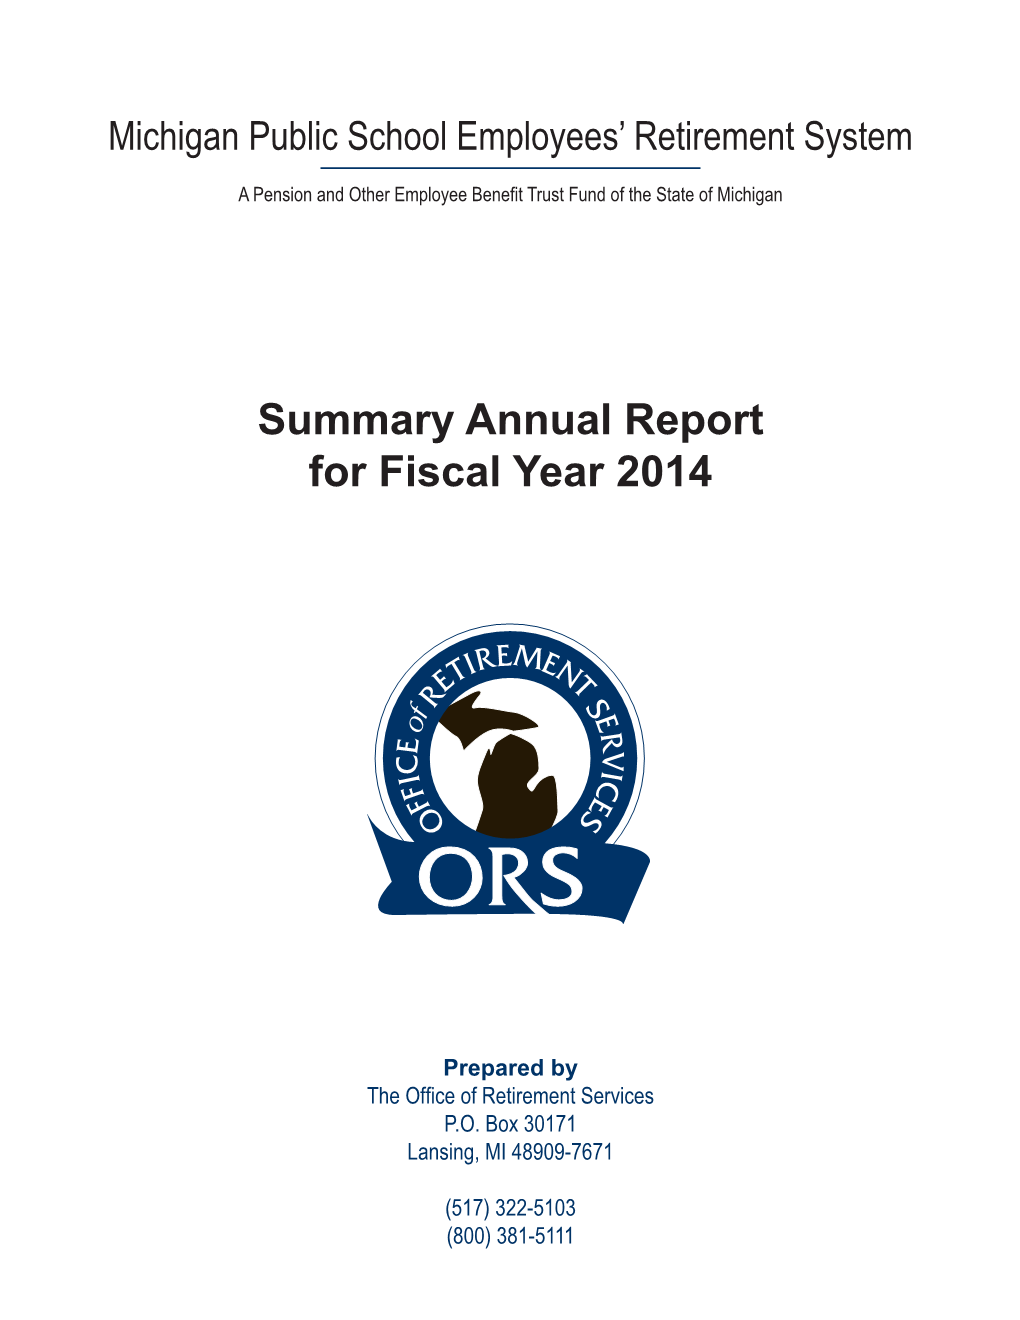 Summary Annual Report FY 2014